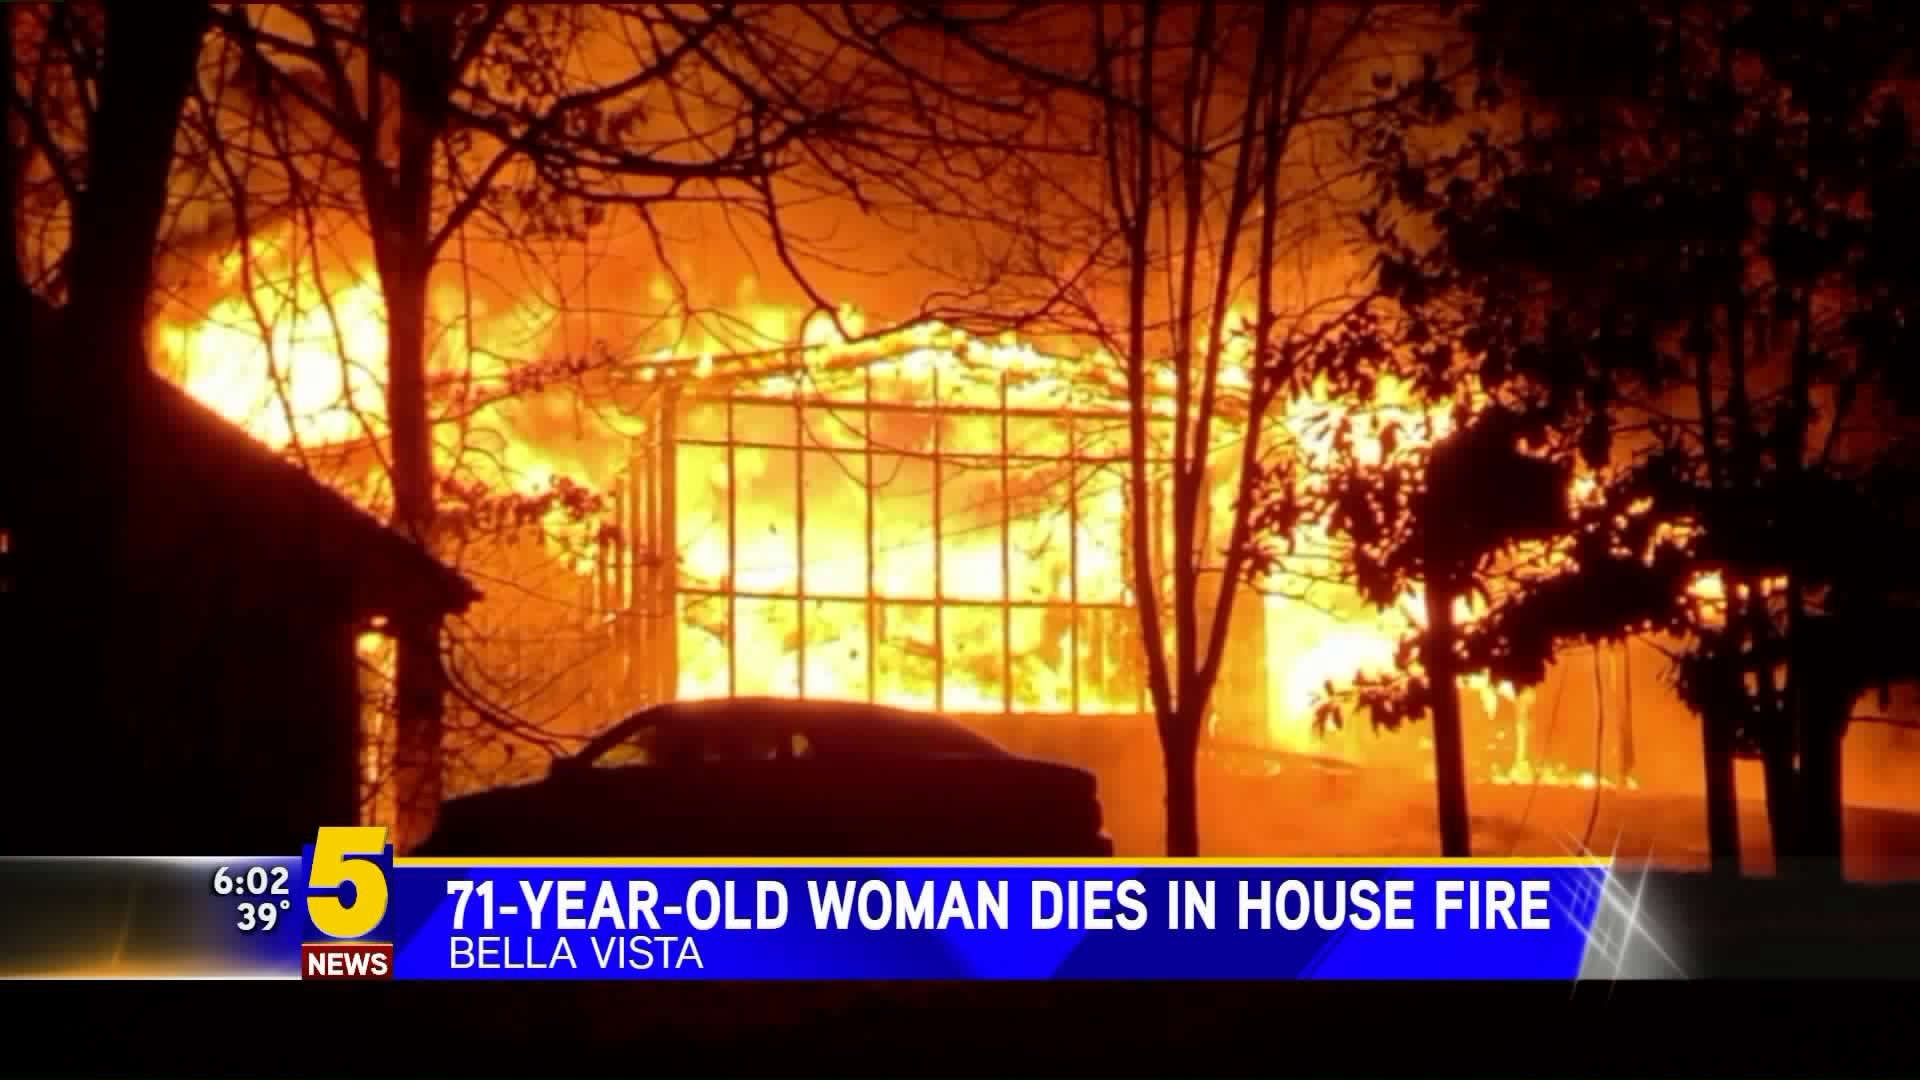 71-YEAR-OLD WOMAN DIES IN HOUSE FIRE